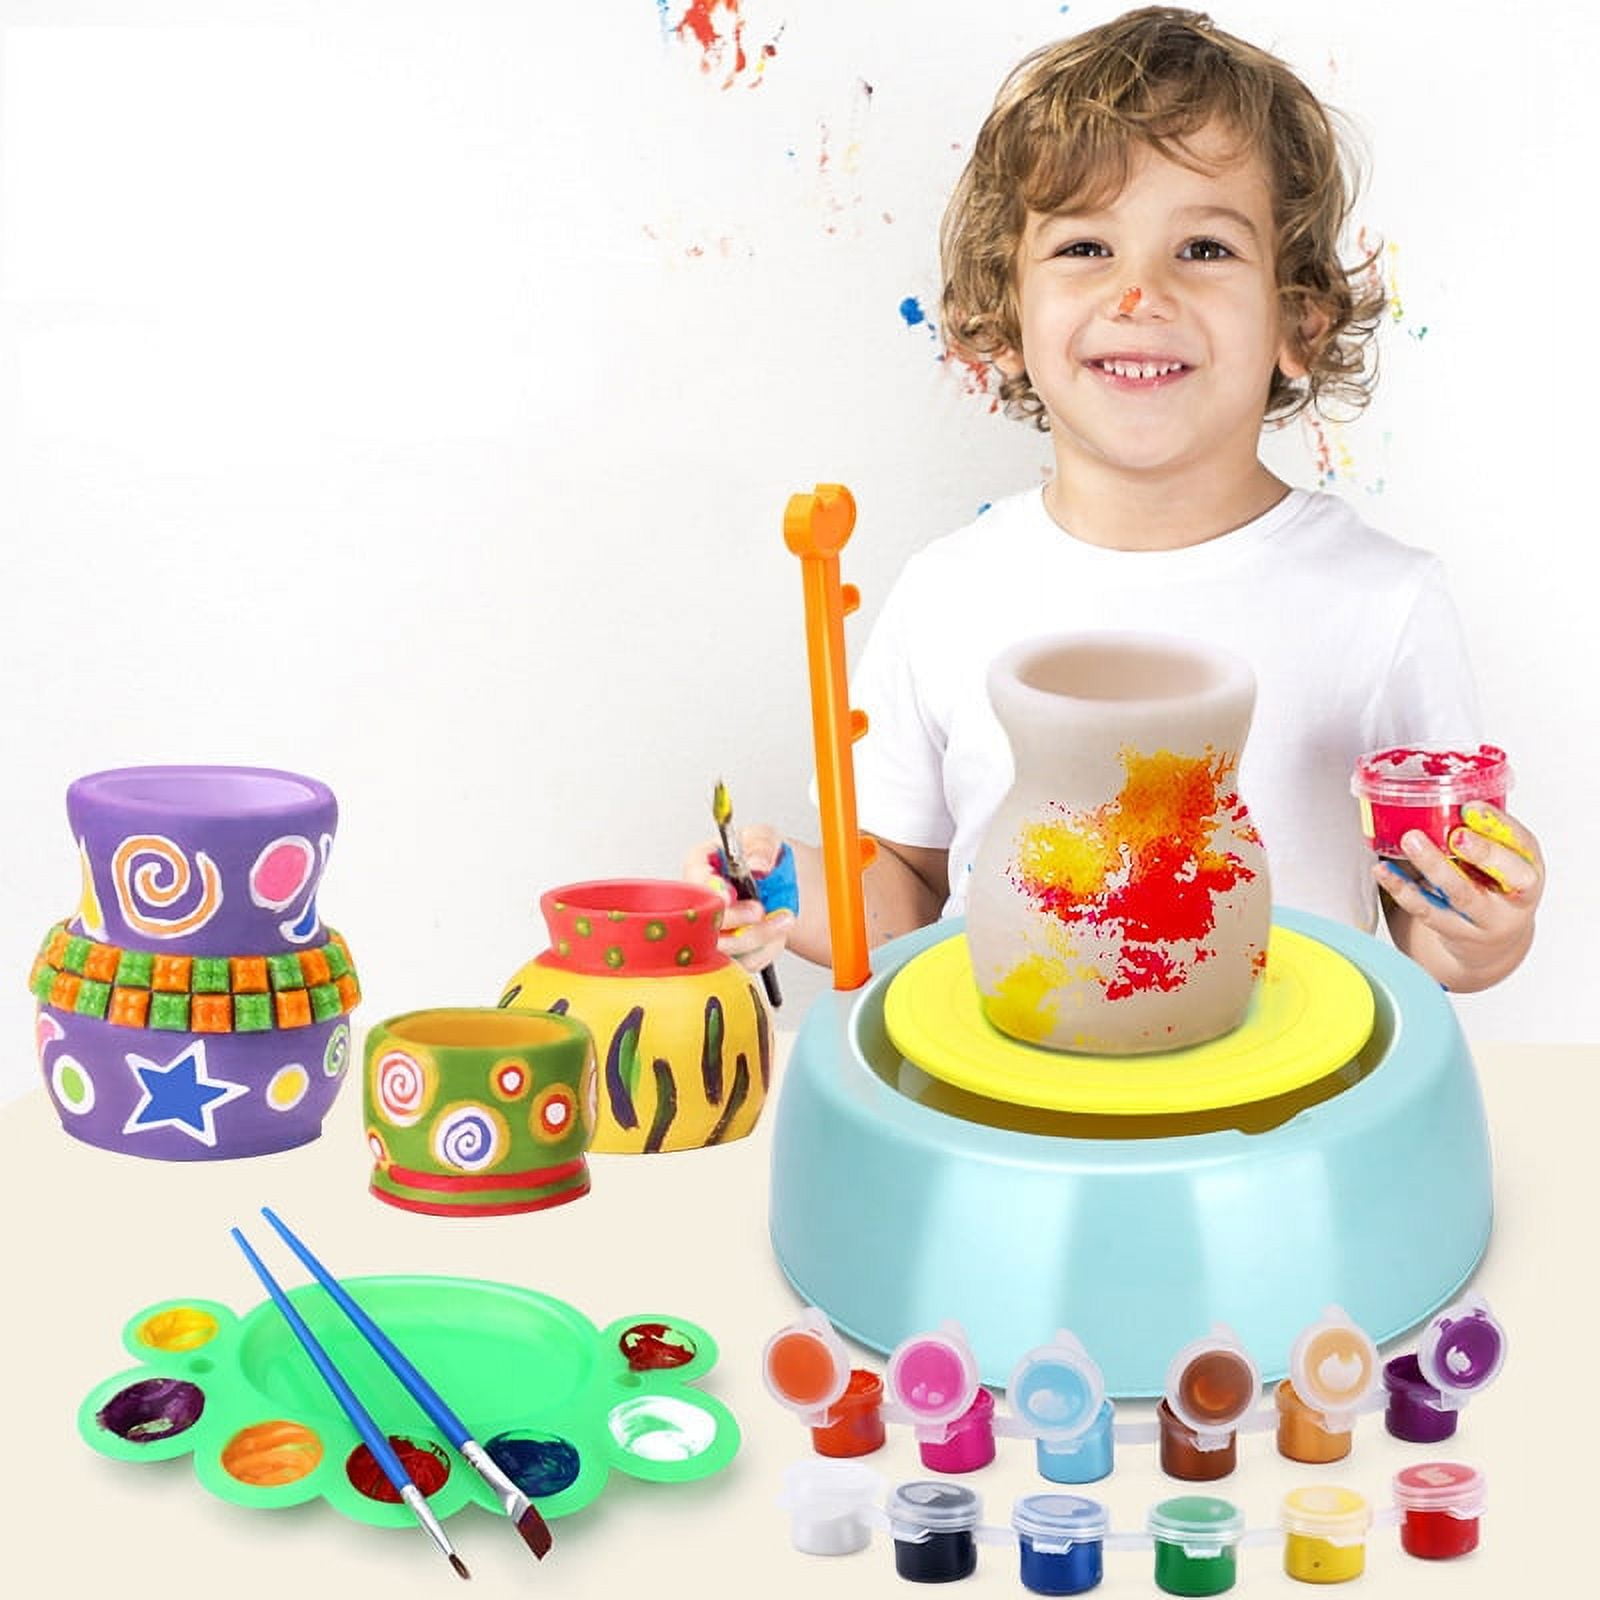 Heiheiup and Wheel Bginners Kids Pottery Paints Kit for Clay with Tools For  Kids Toy DIY Education Kids 2-4